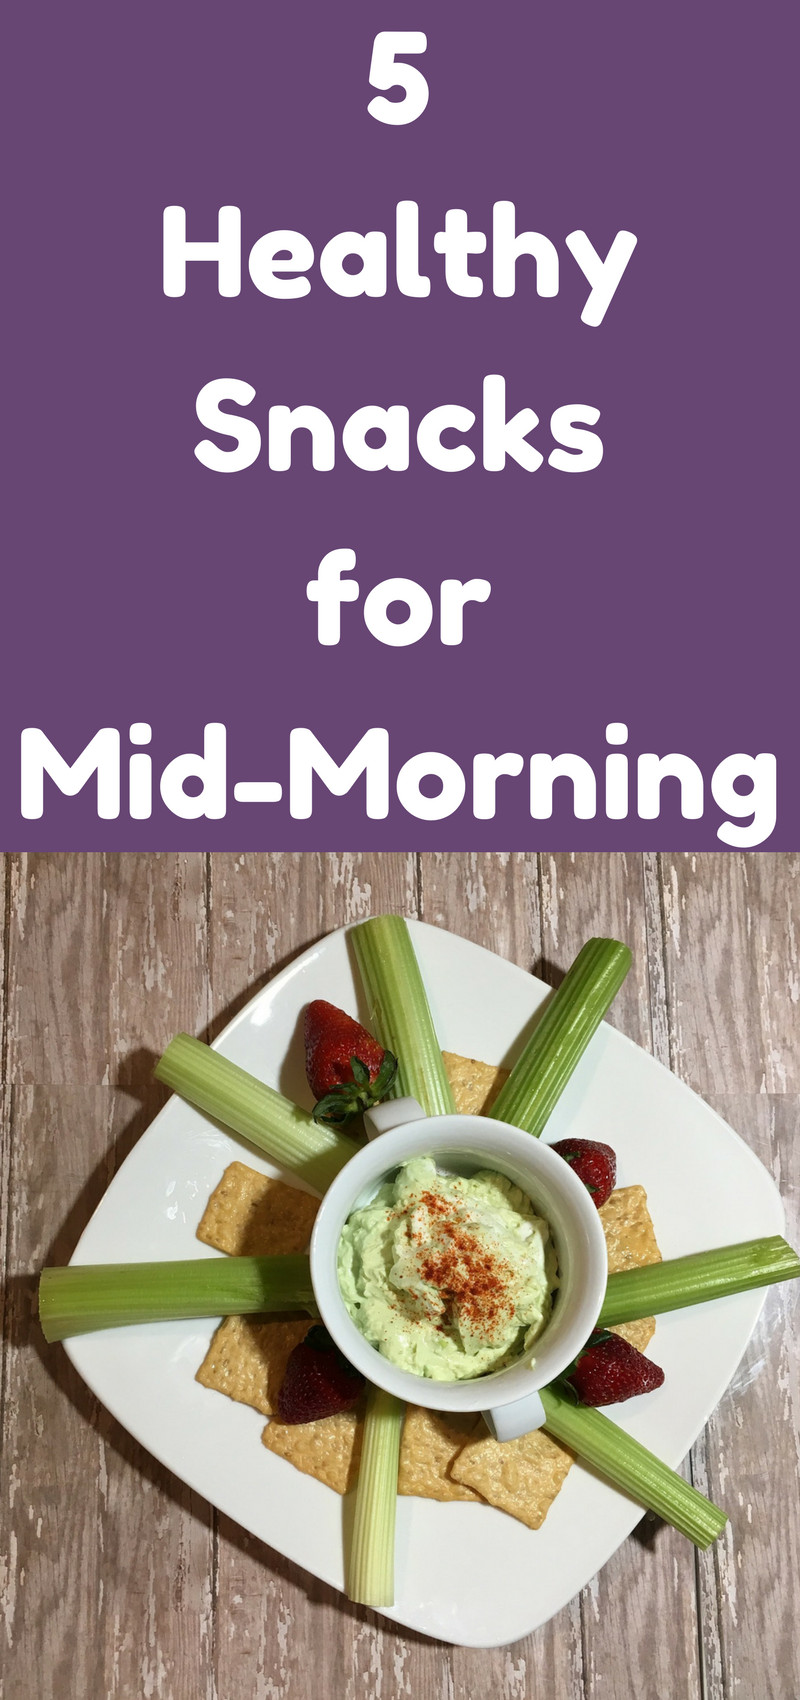 Healthy Mid Morning Snacks
 5 Healthy Snacks for Mid Morning